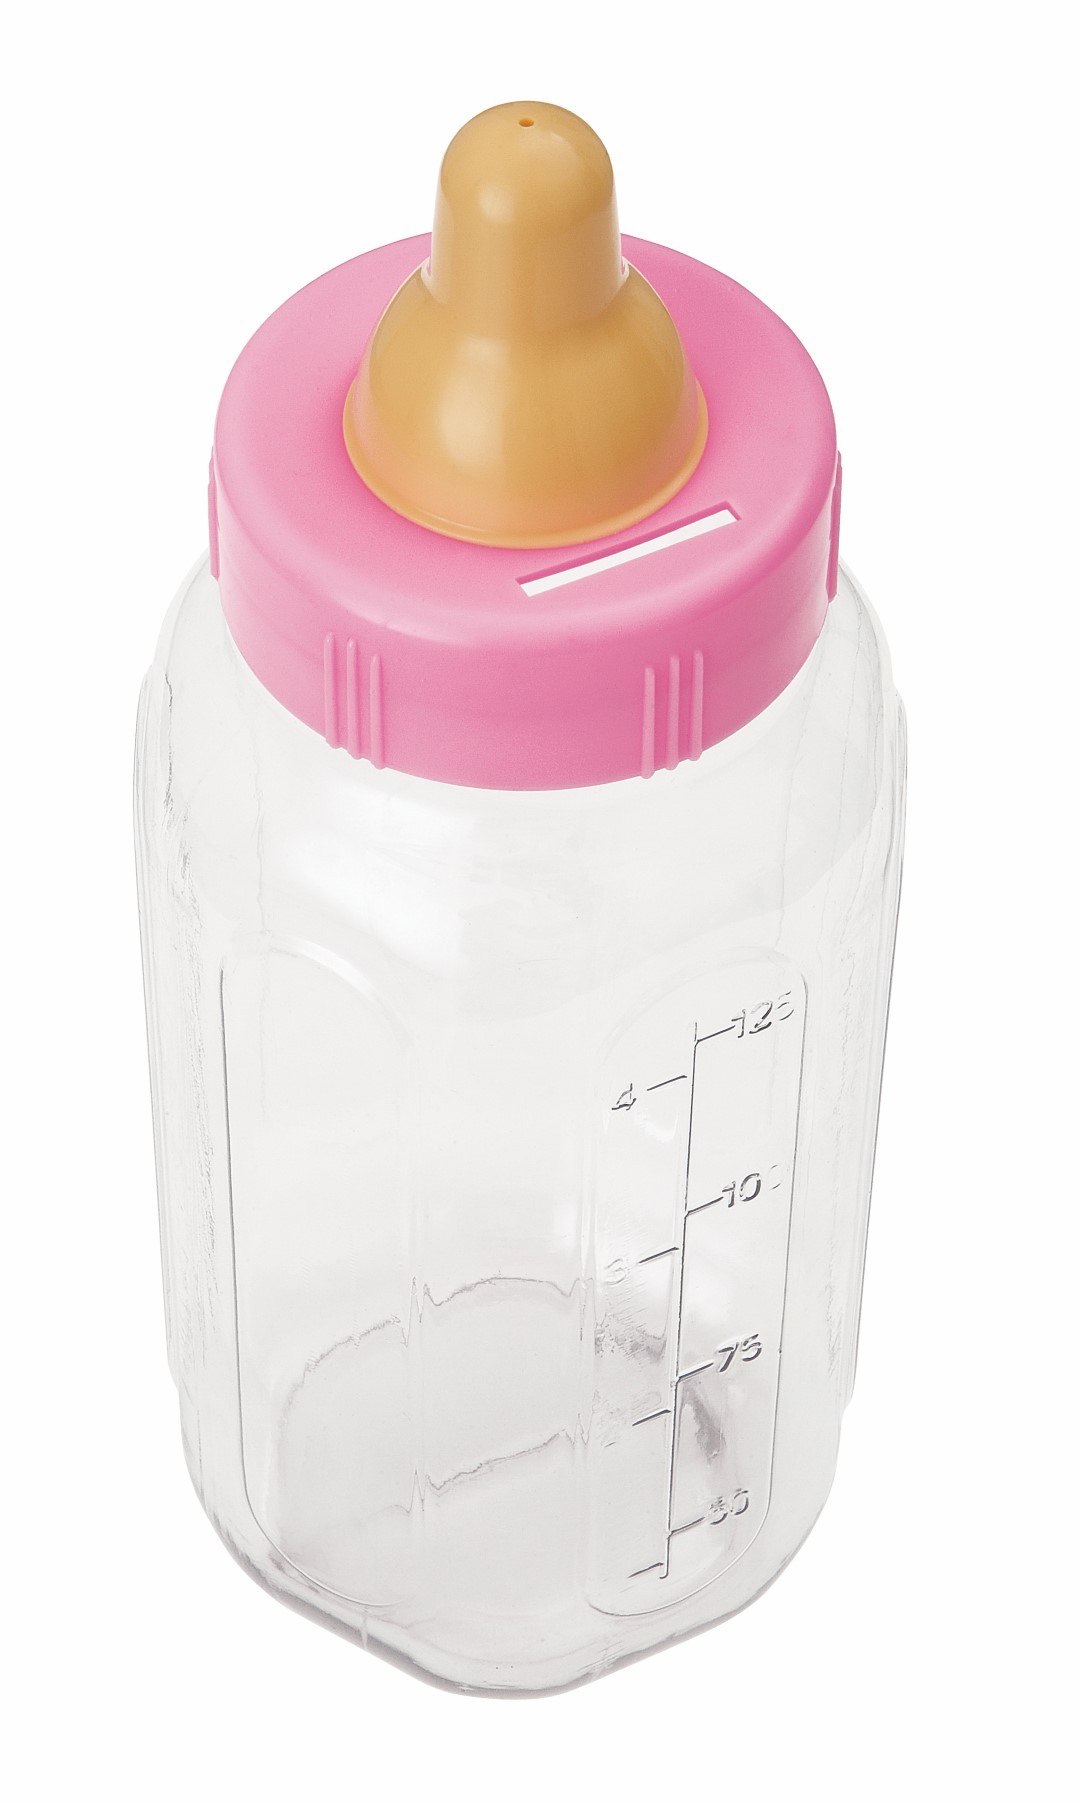 Giant Baby Bottle- pink